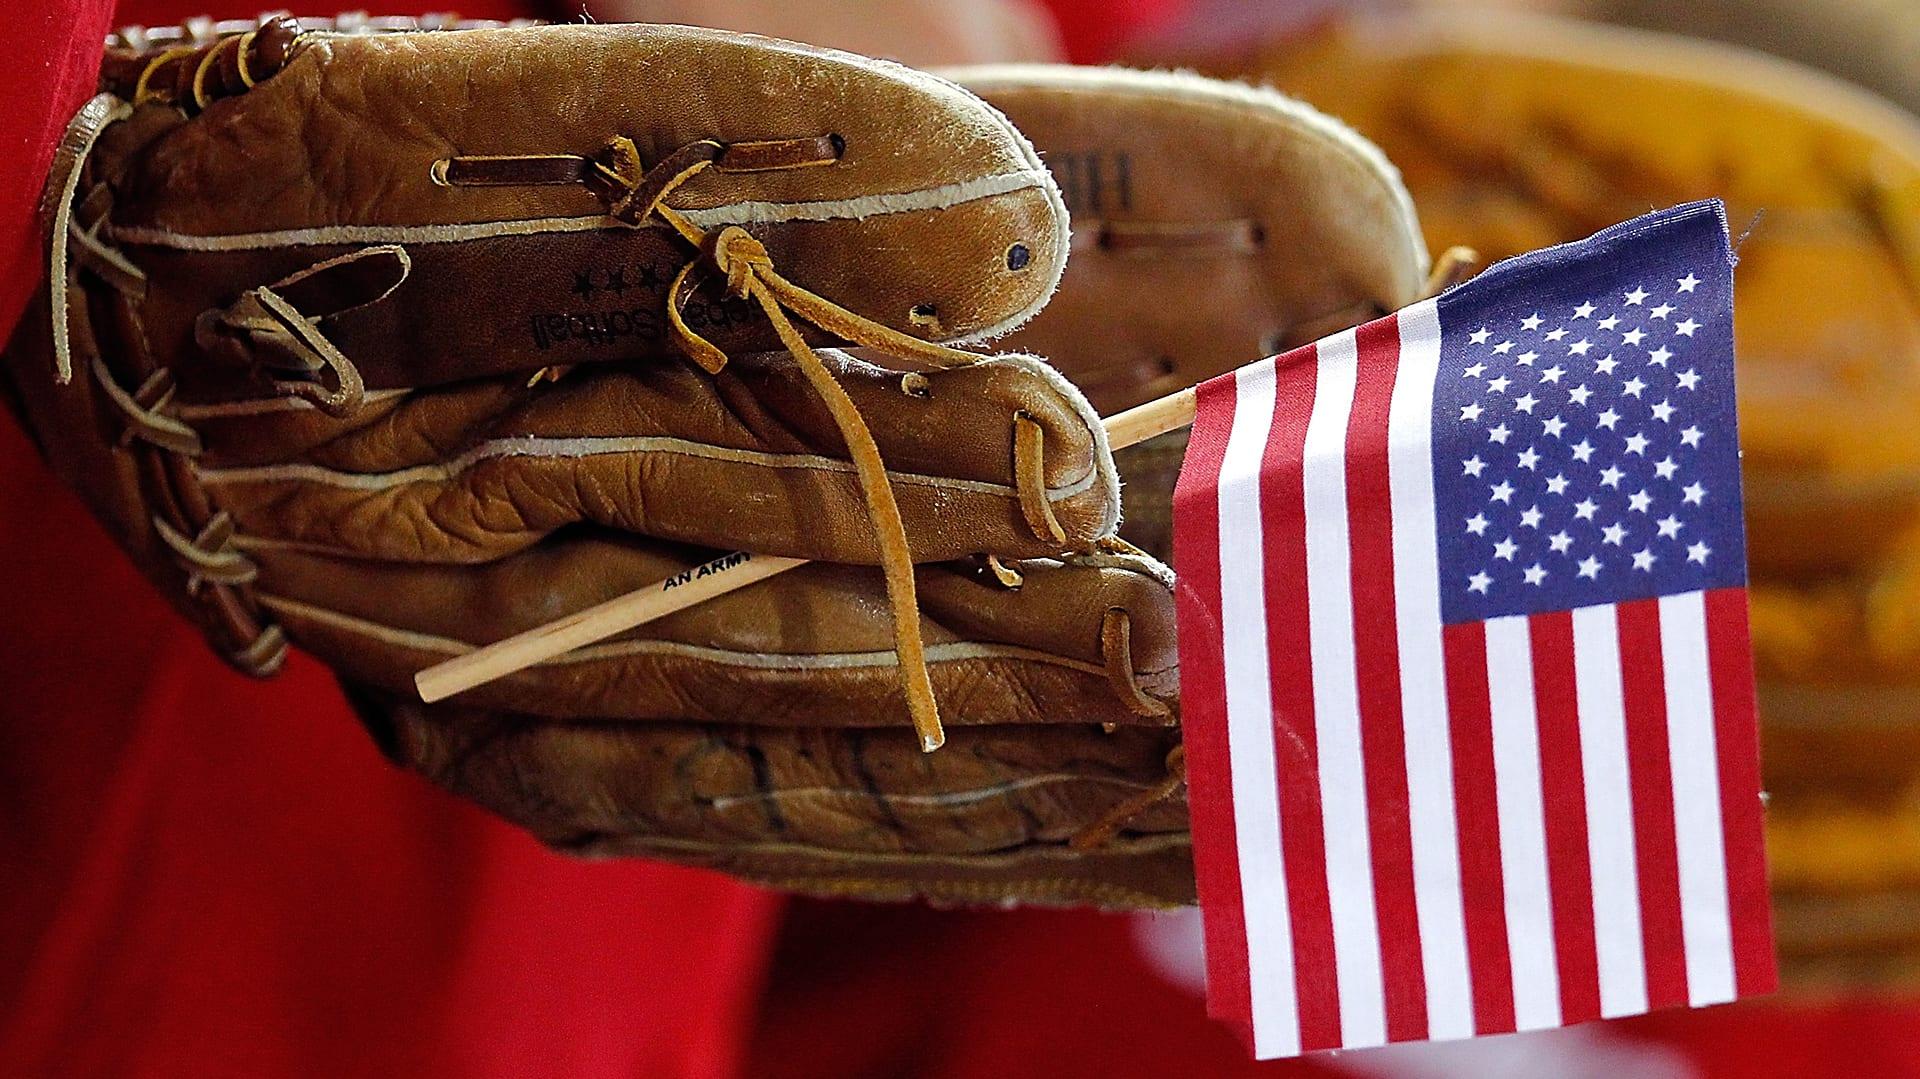 Baseball is a great example of America offers hope for future of